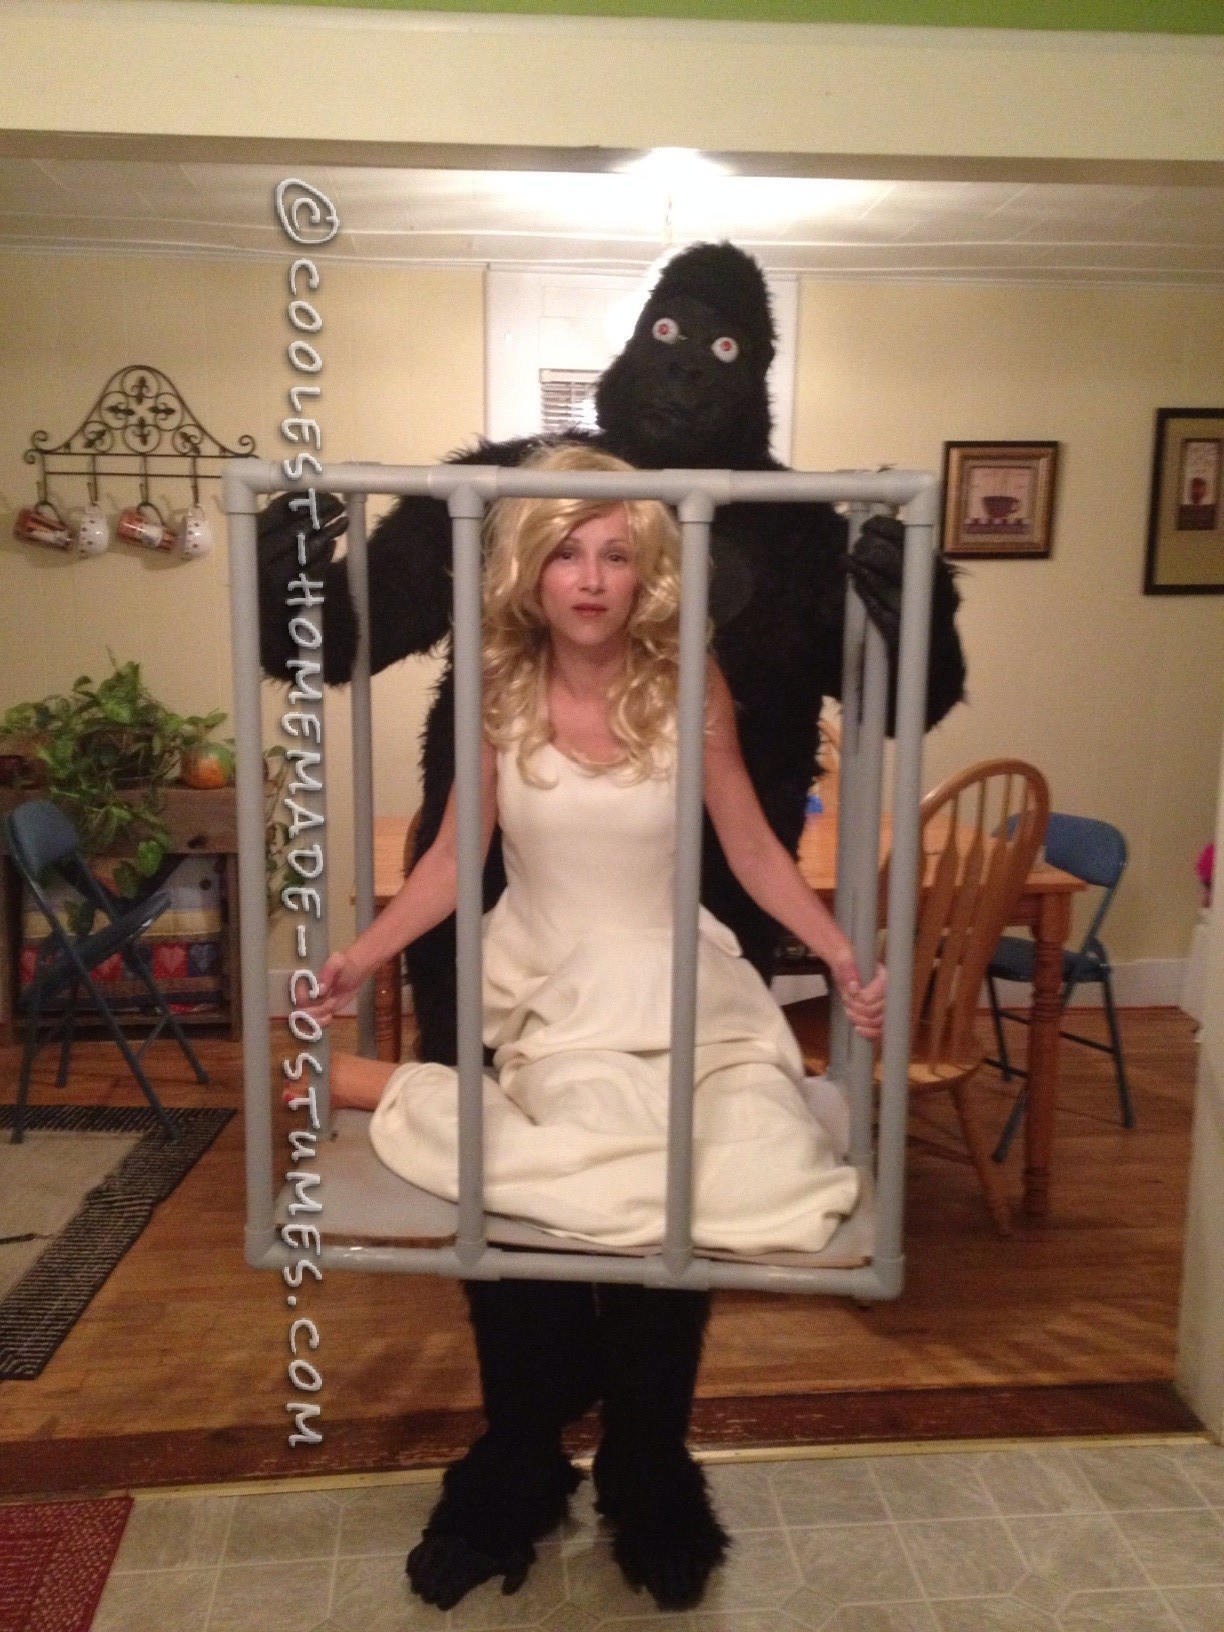 King Kong and a Woman in a Cage Illusion Costume